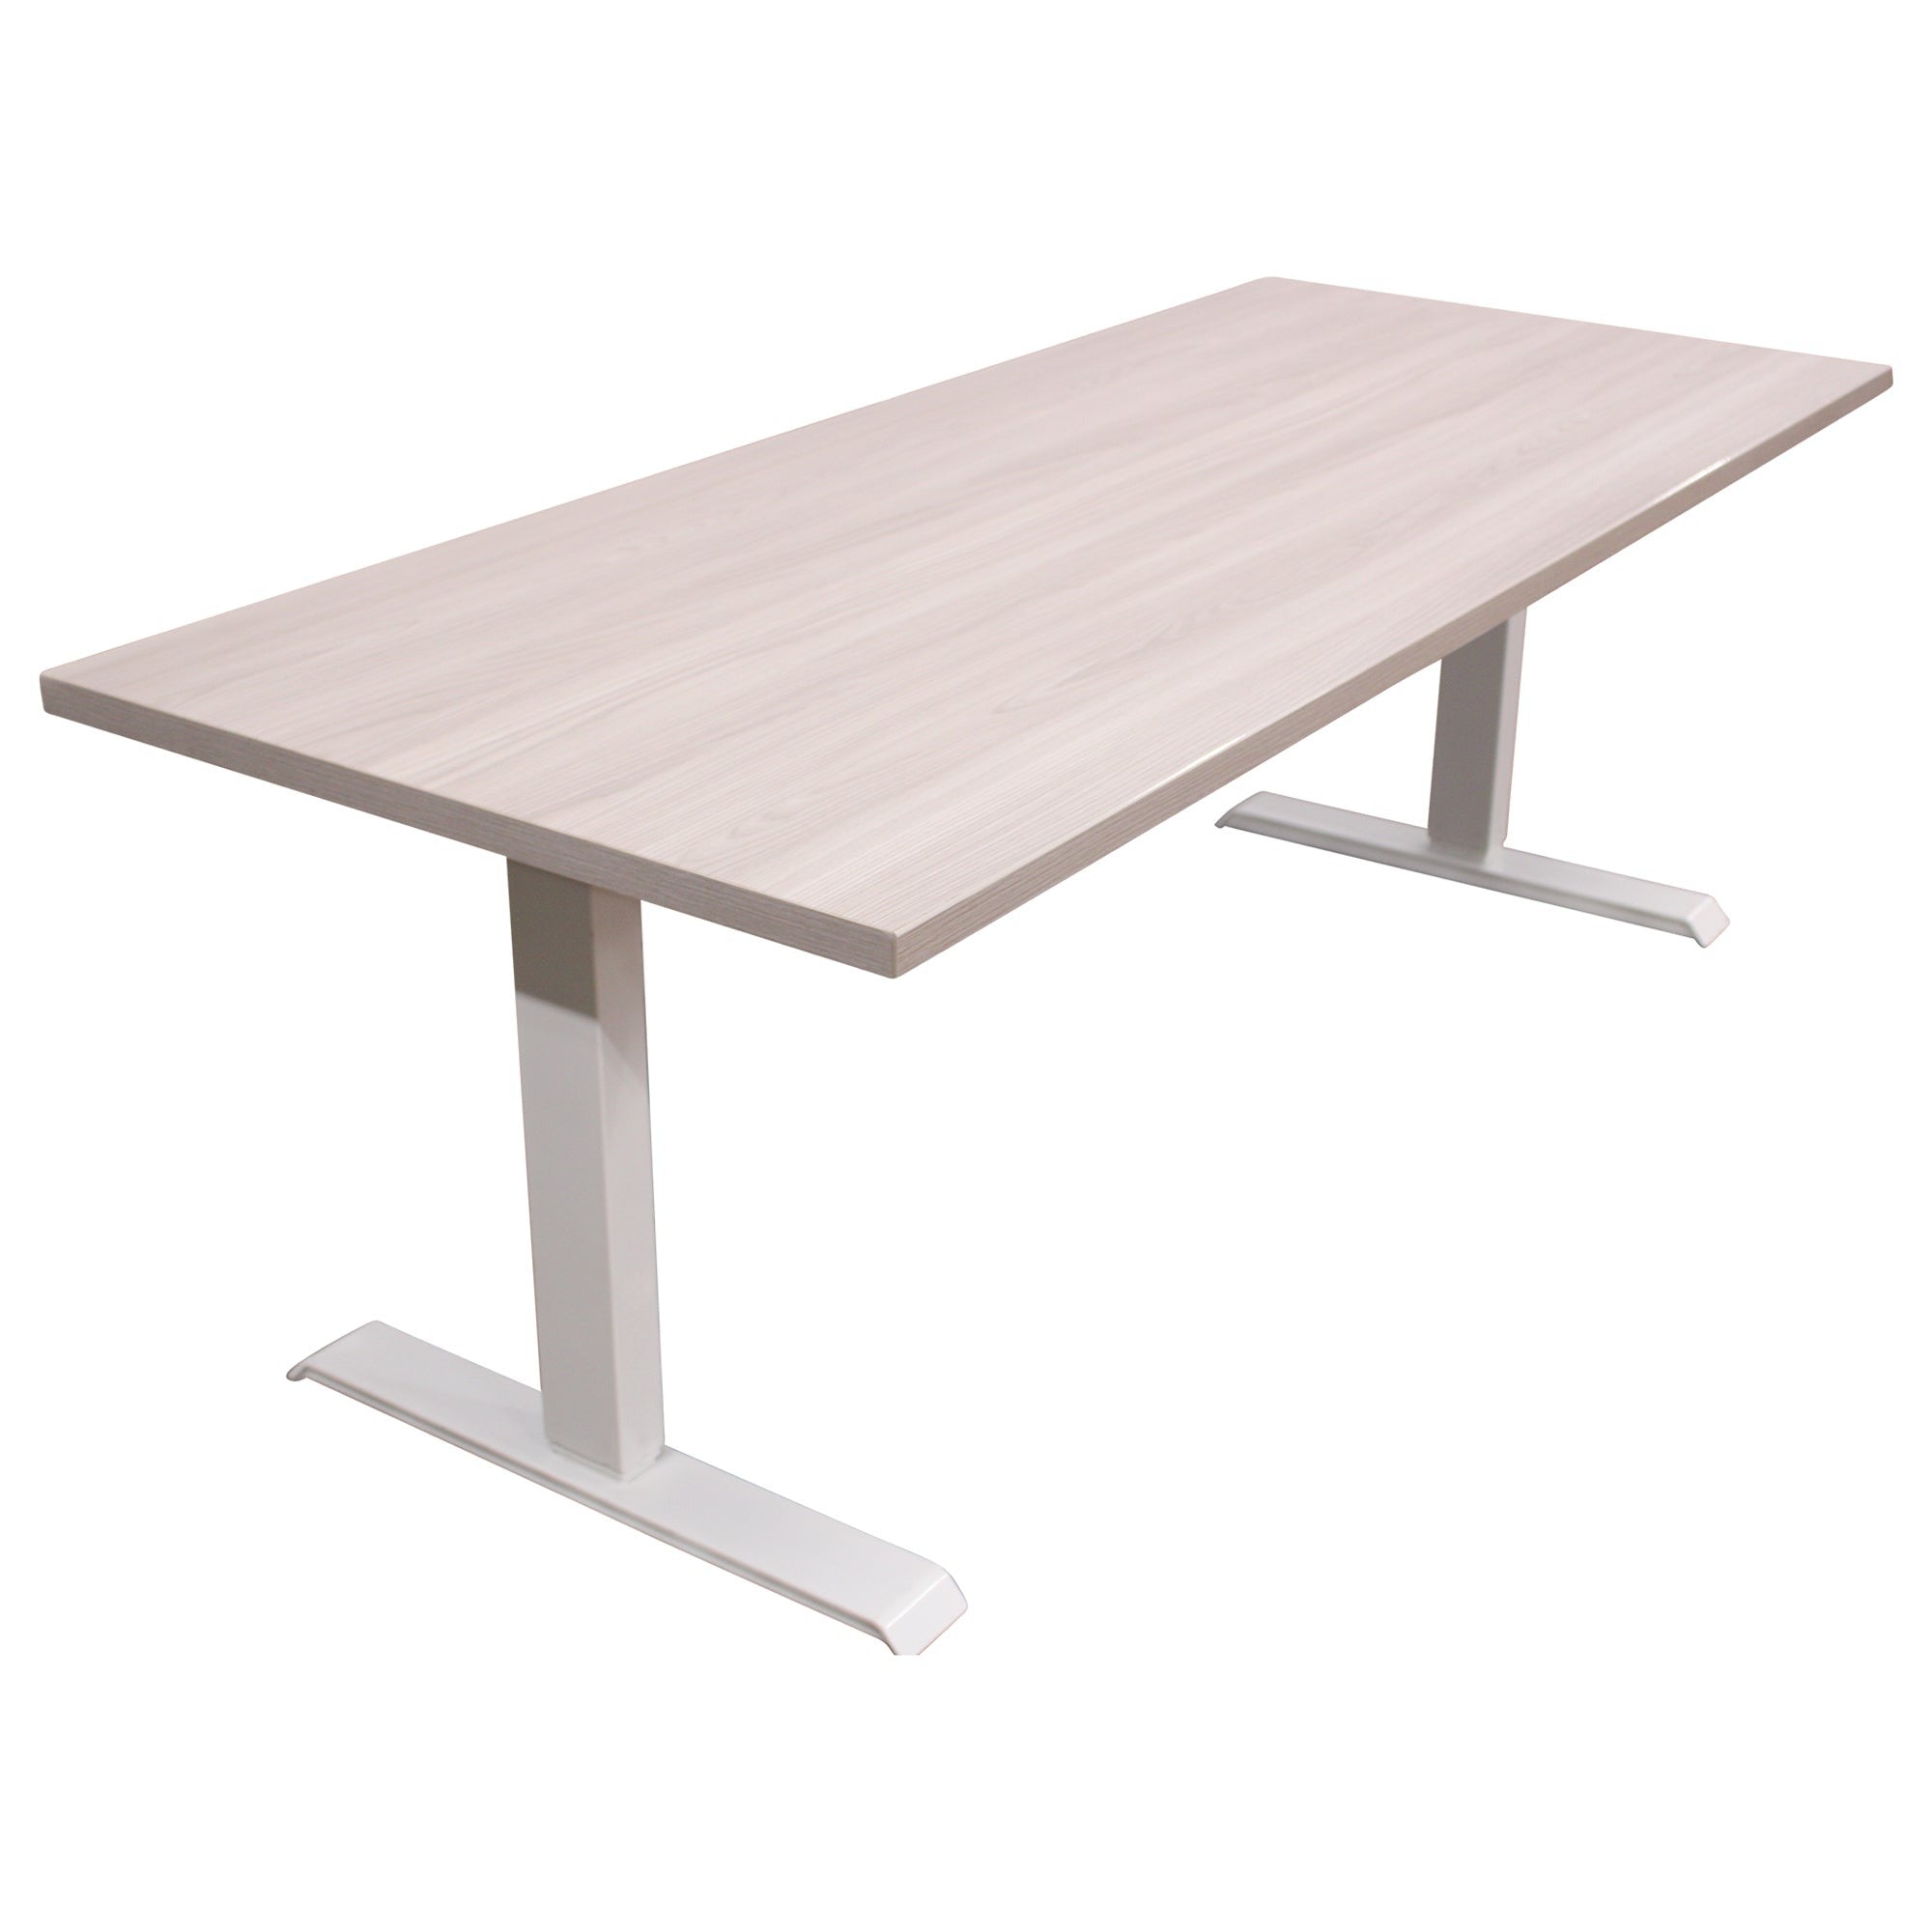 Haworth Desk with HiLo Base, Oatmeal - Preowned